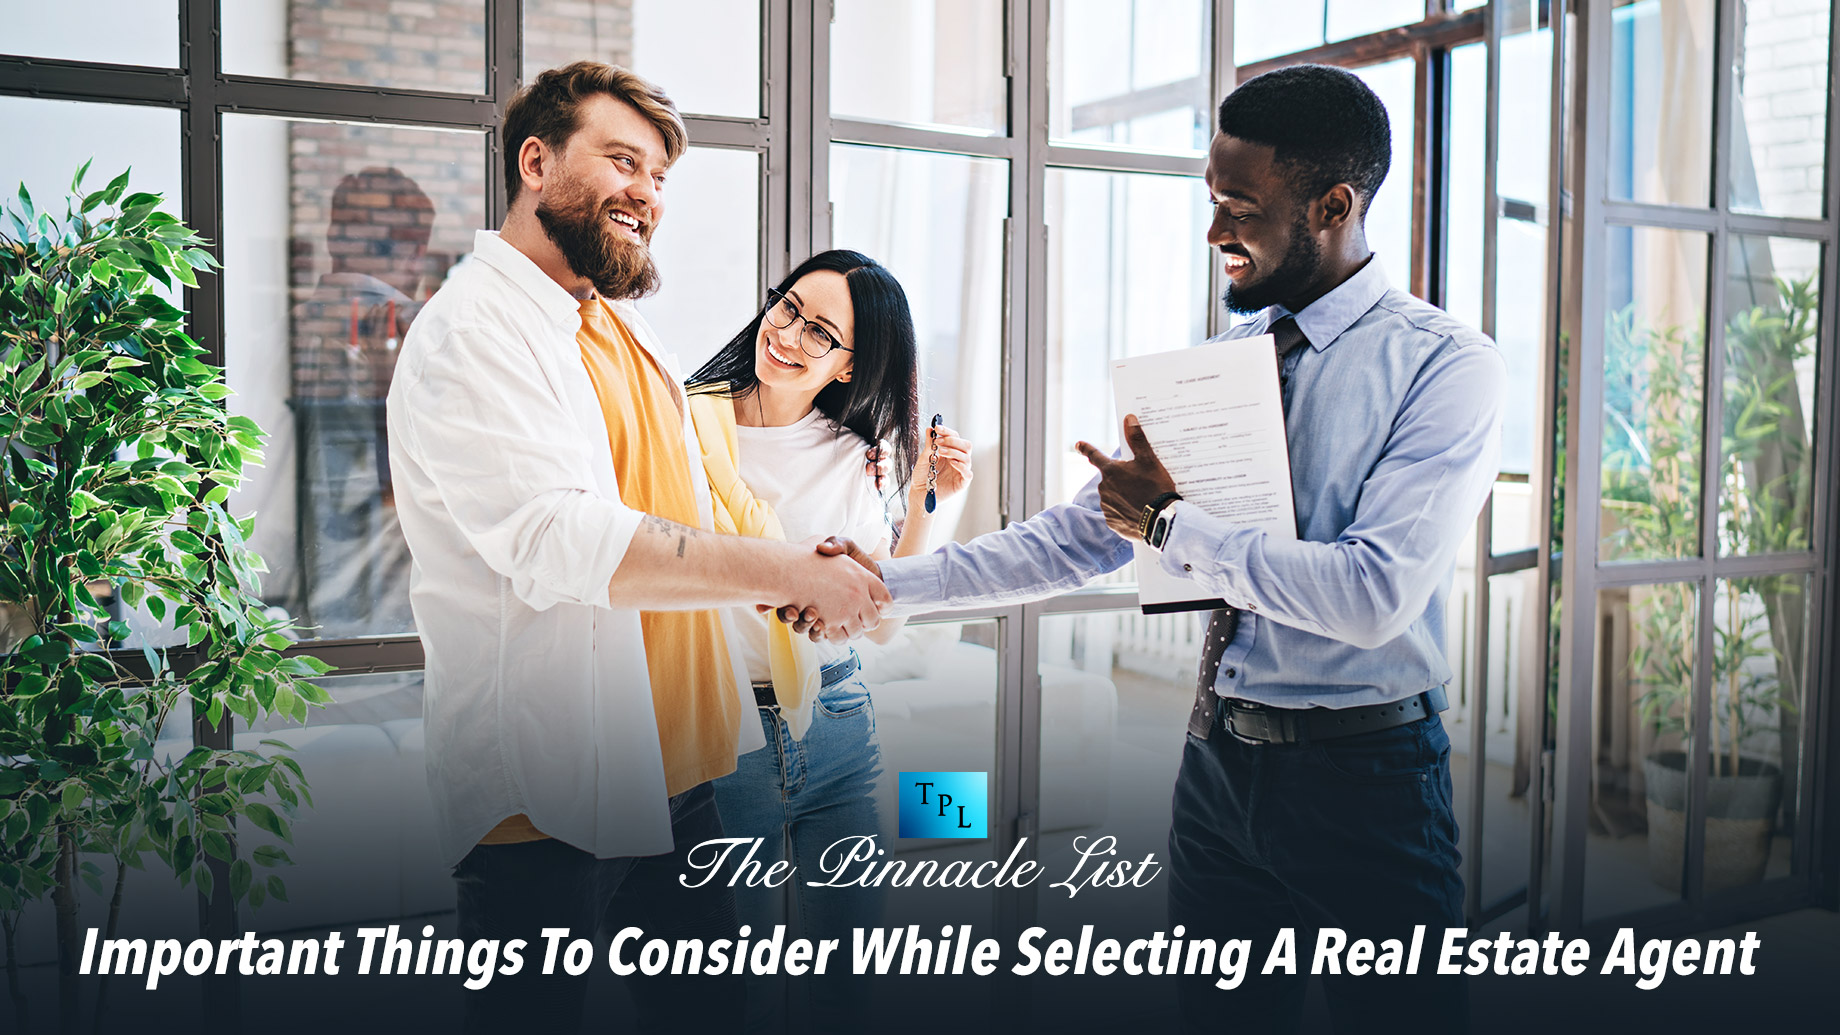 Important Things To Consider While Selecting A Real Estate Agent